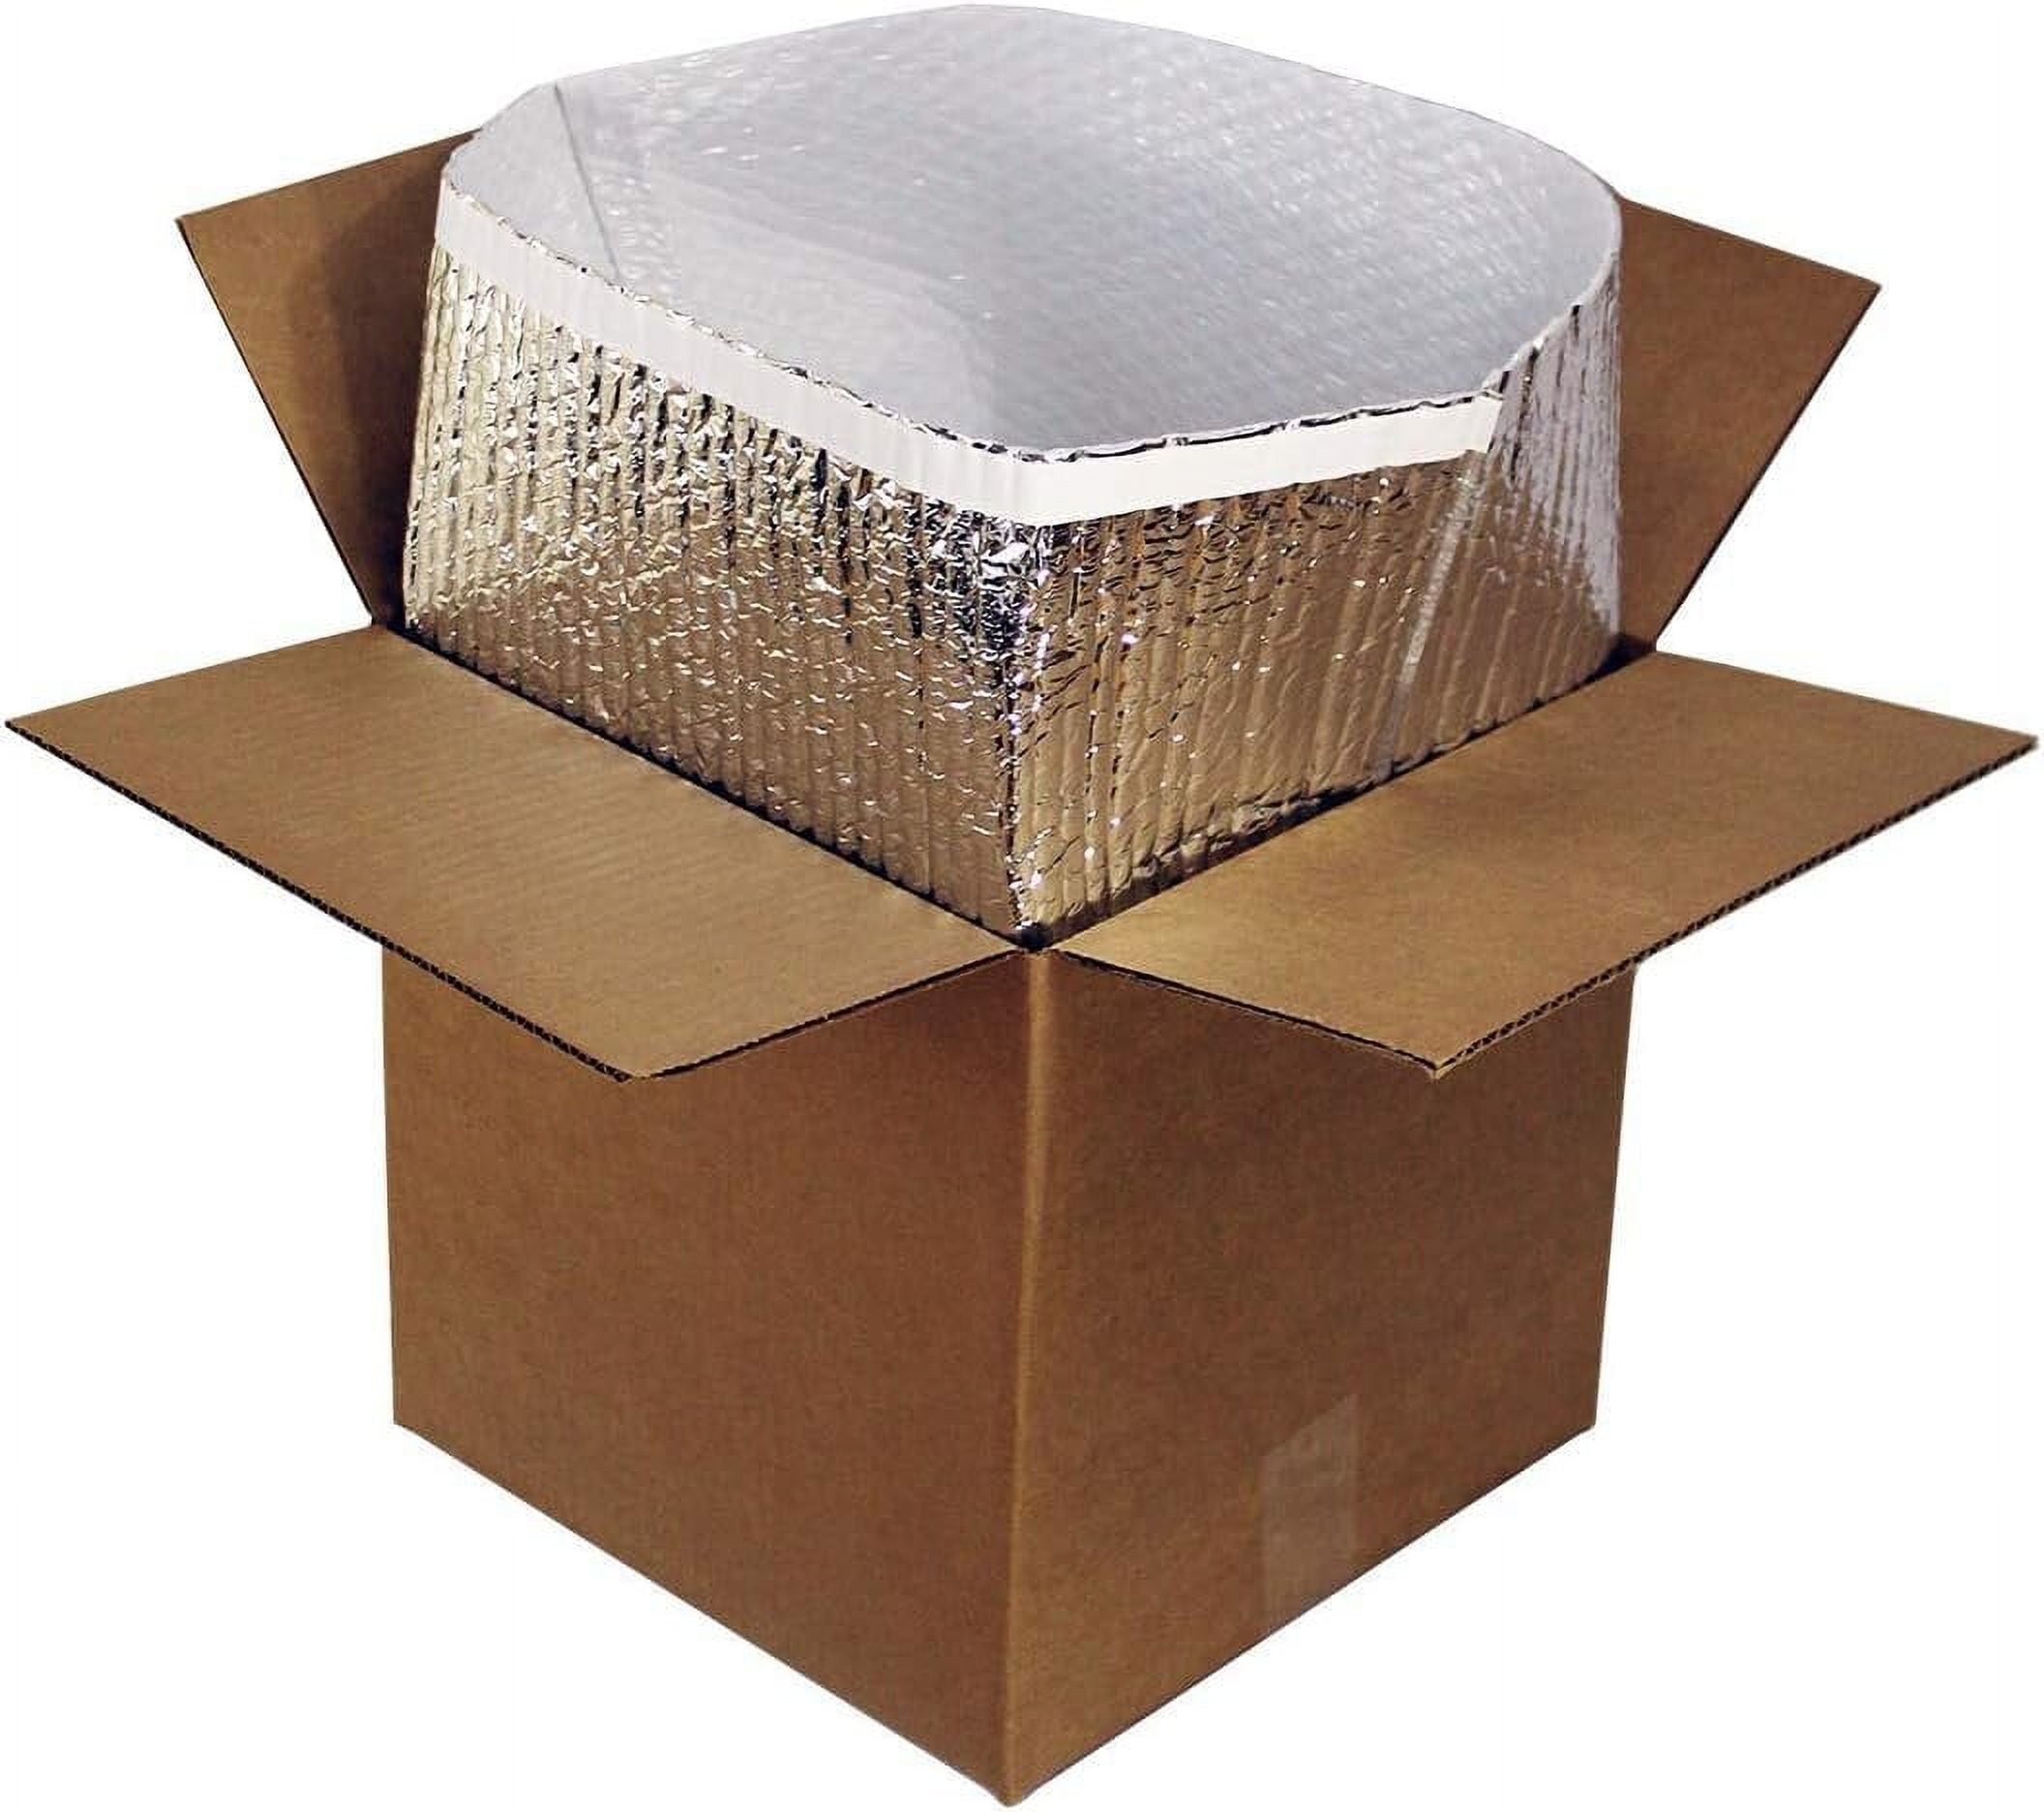 Foil Insulated Box Liners, 6 x 6 x 6 Inches. 10 Pack Insulated Shipping  Boxes for Frozen Food. Self-Seal Insulated Boxes for Shipping Food.  Leakproof